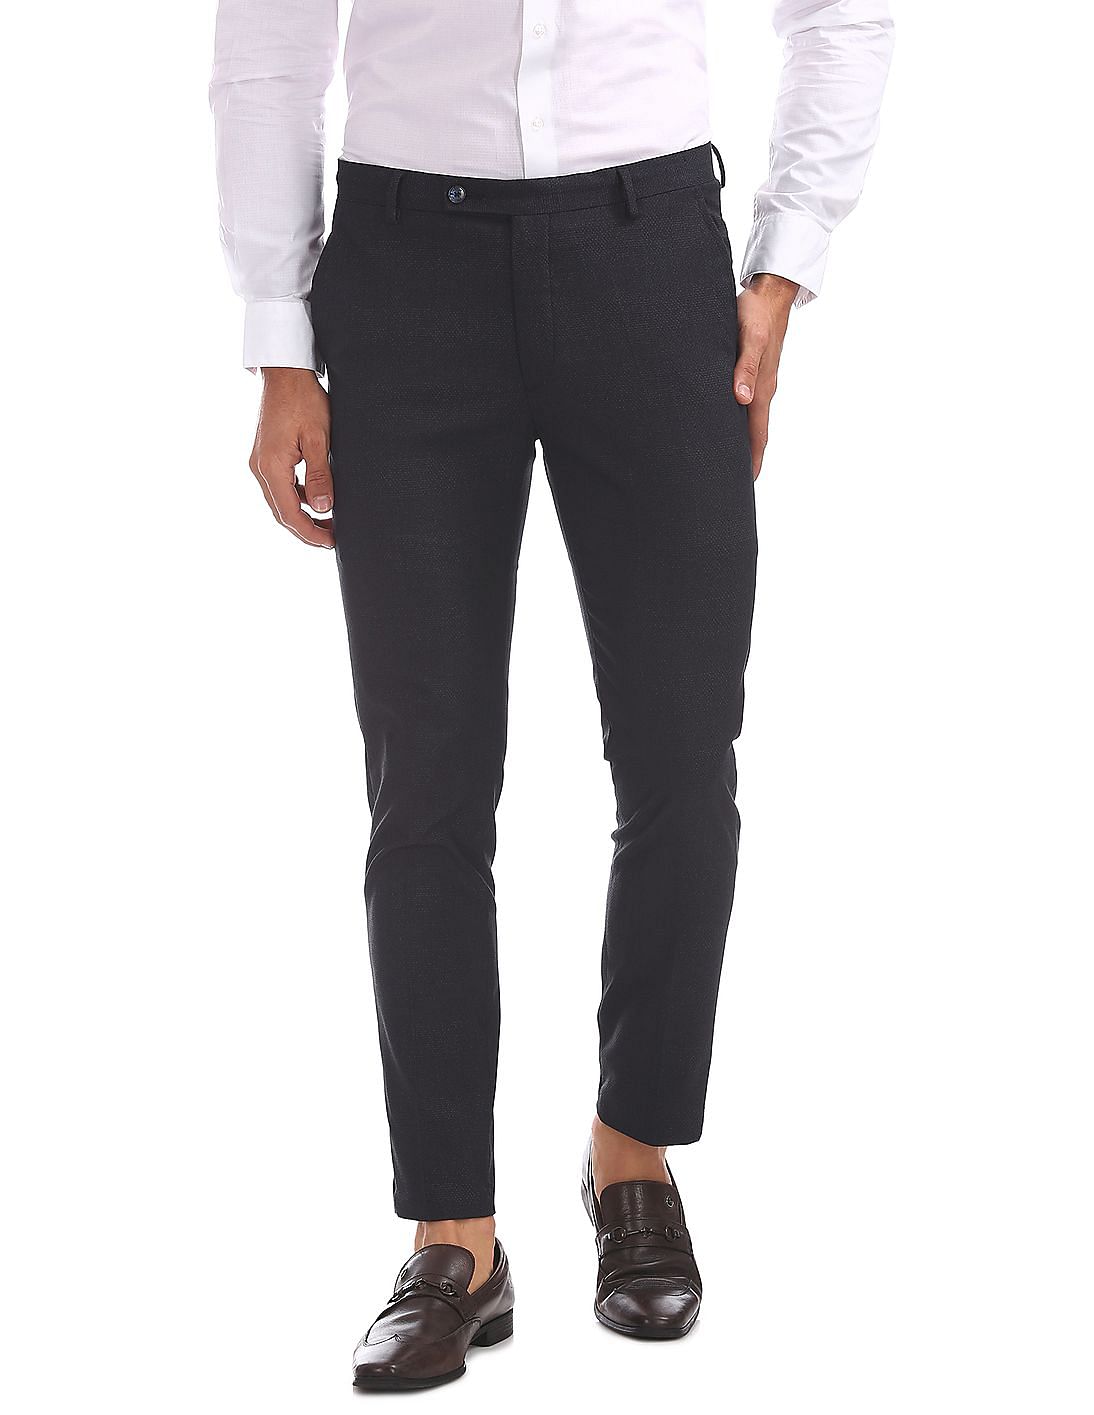 Buy Men Super Slim Fit Patterned Trousers online at NNNOW.com